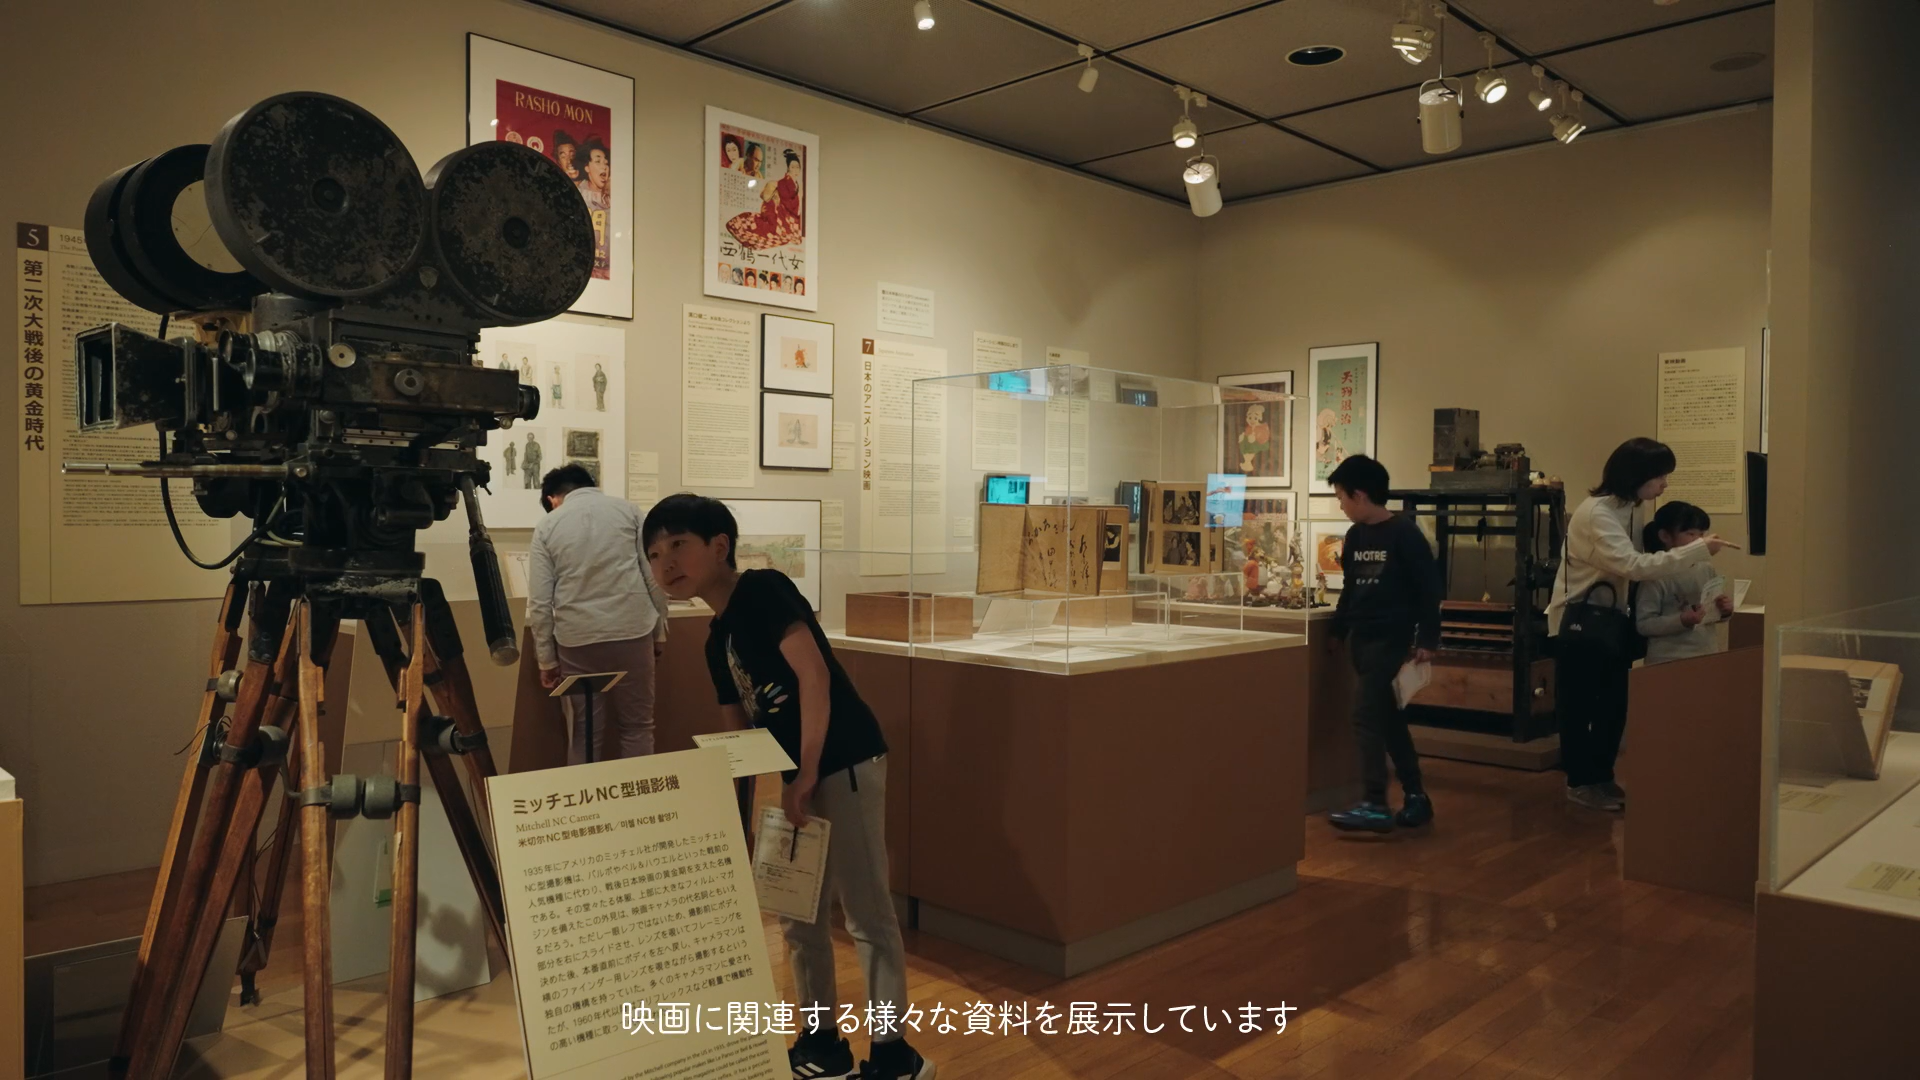 How to enjoy the permanent exhibition with NFAJ Self-Guide

